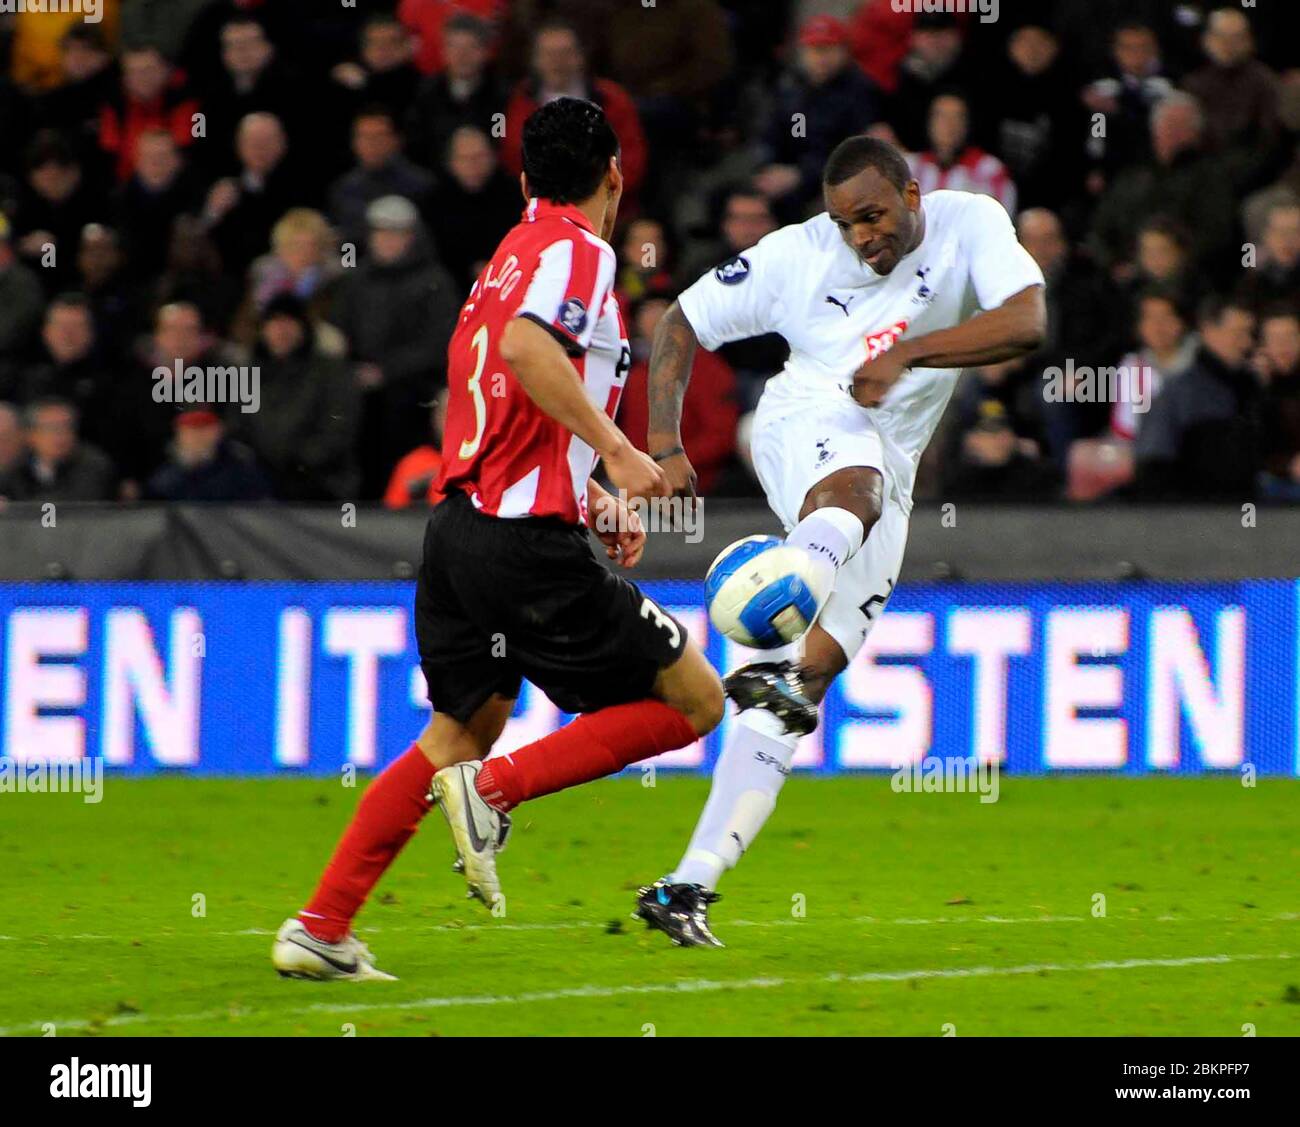 EINDHOVEN, NEDERLAND. MARCH 12: Darren Bent (Spurs) has a shot on goal. During UEFA Cup Round of 16 Second Leg between PSV Eindhoven and Tottenham Hot Stock Photo